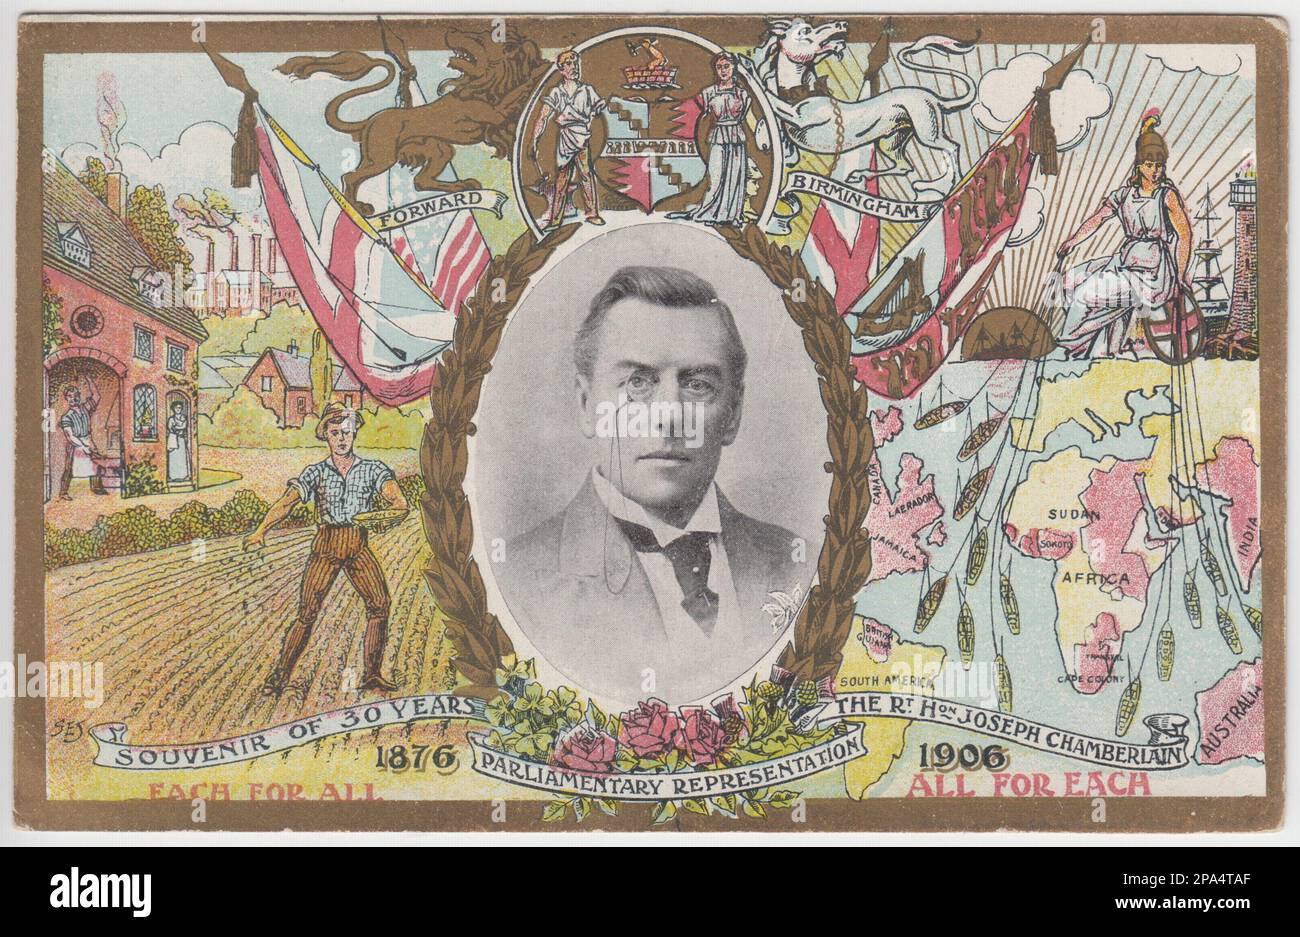 Joseph Chamberlain: souvenir of 30 years as a Member of Parliament for Birmingham, 1876-1906. The colour postcard includes a portrait of Chamberlain and images of farming (sowing seeds in a field), industry (blacksmith & smoking chimneys) and the British Empire (Britannia sending her navy across the world, including to Sudan, South Africa, Nigeria, Jamaica, Canada, British Guiana, India and Australia). The coat of arms of Birmingham are also included with symbols of Britain. Stock Photo